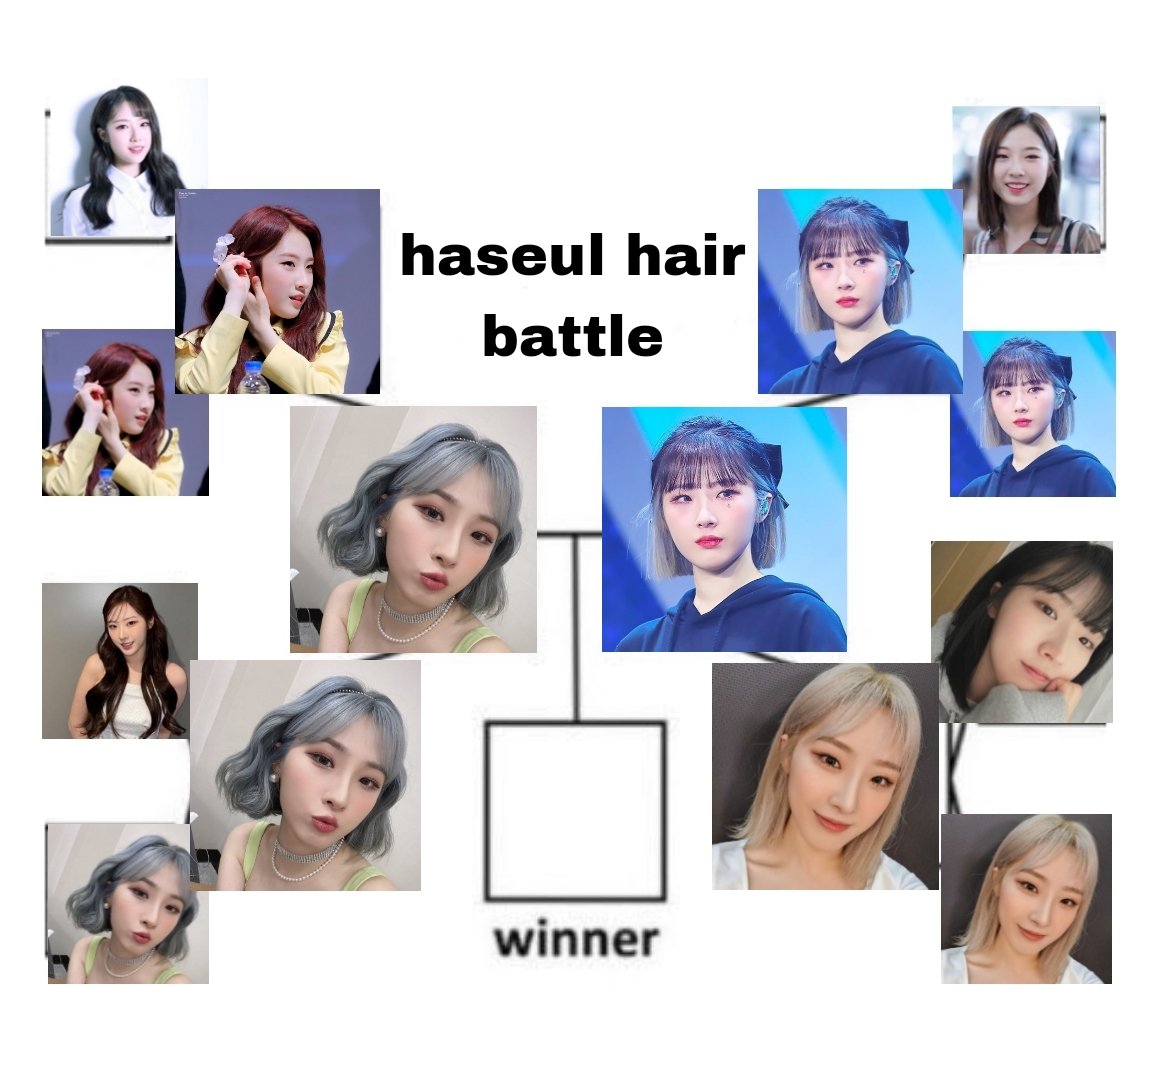 HASEUL HAIR BATTLE ‼️ FINALE

vote bellow for your favorite haseul hair 🔥